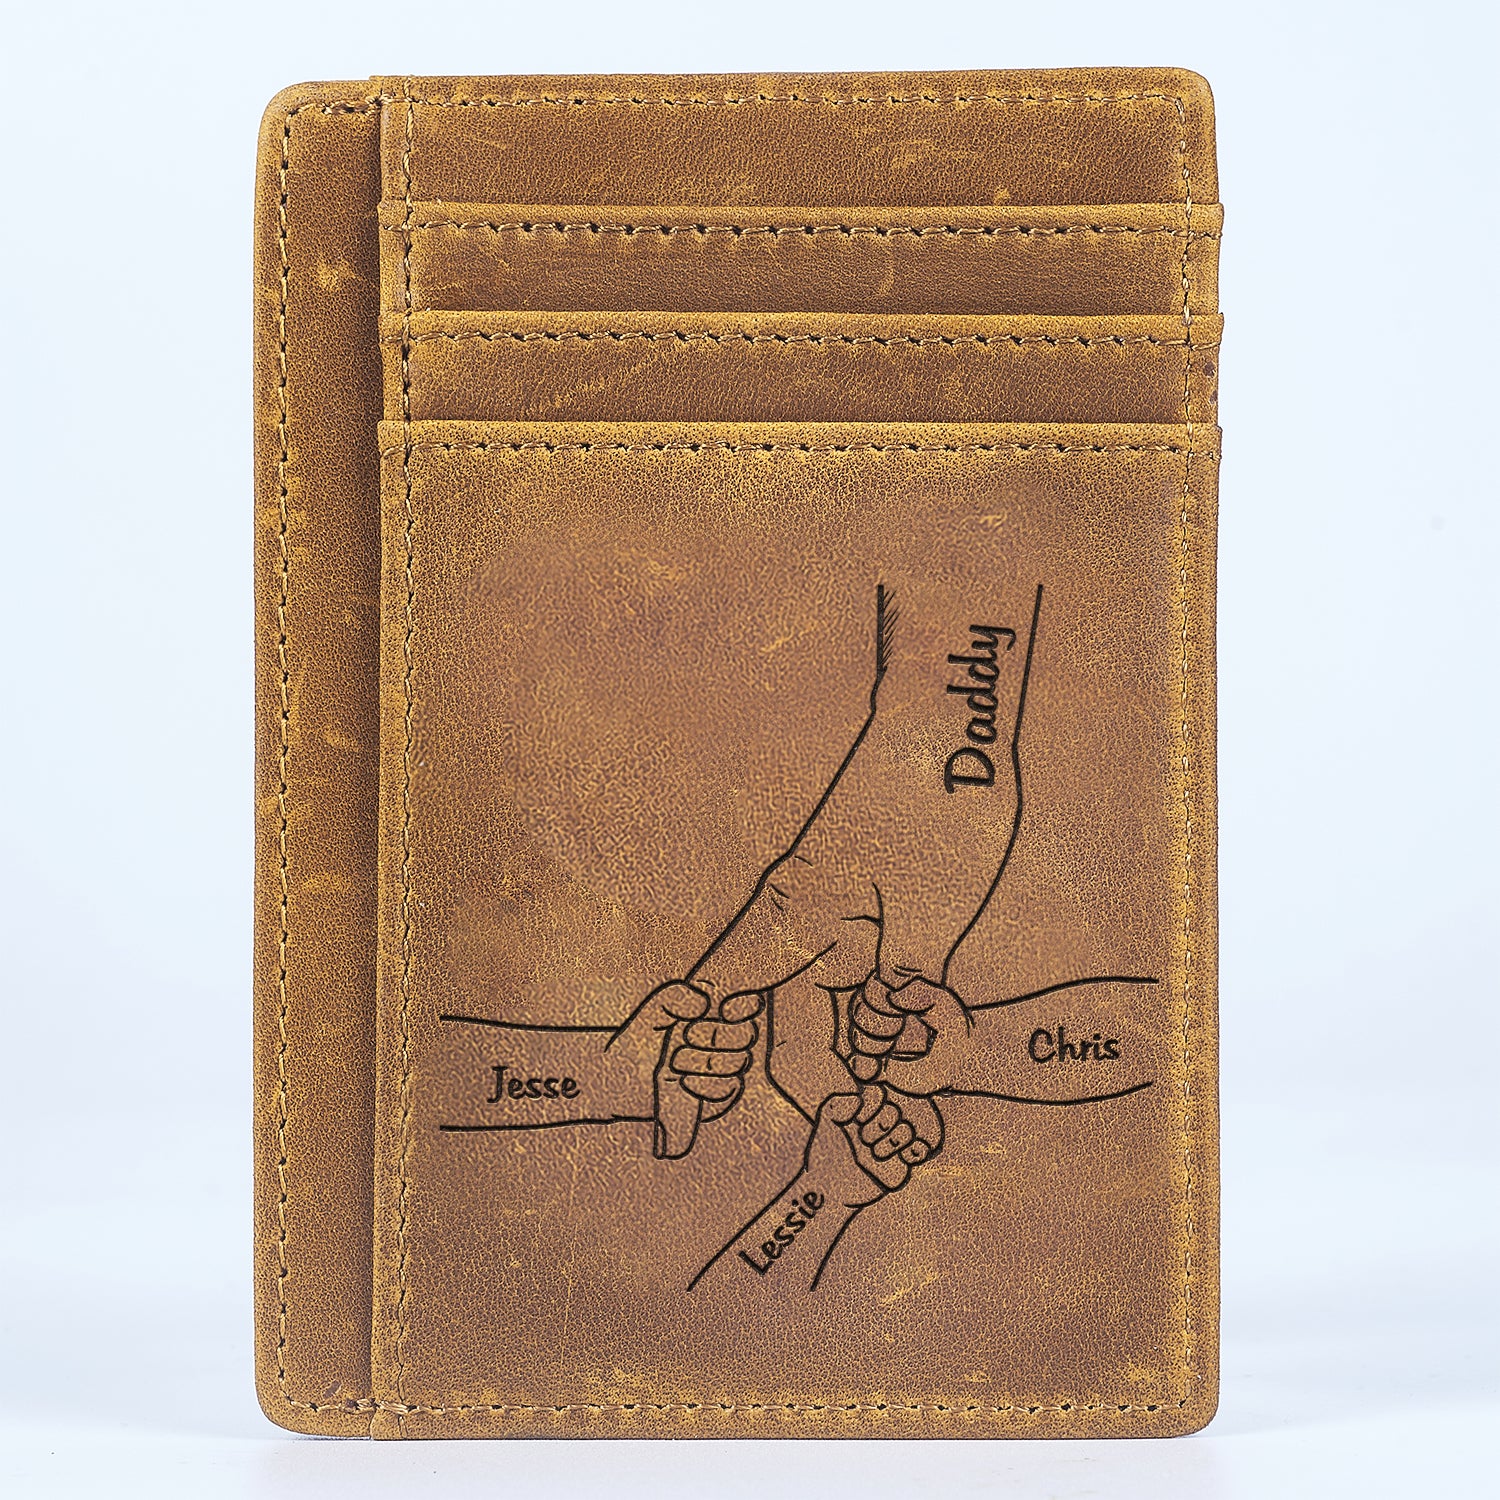 Hand In Hand - Gift For Dad, Mom, Grandma, Grandpa, Husband, Wife - Personalized Card Wallet